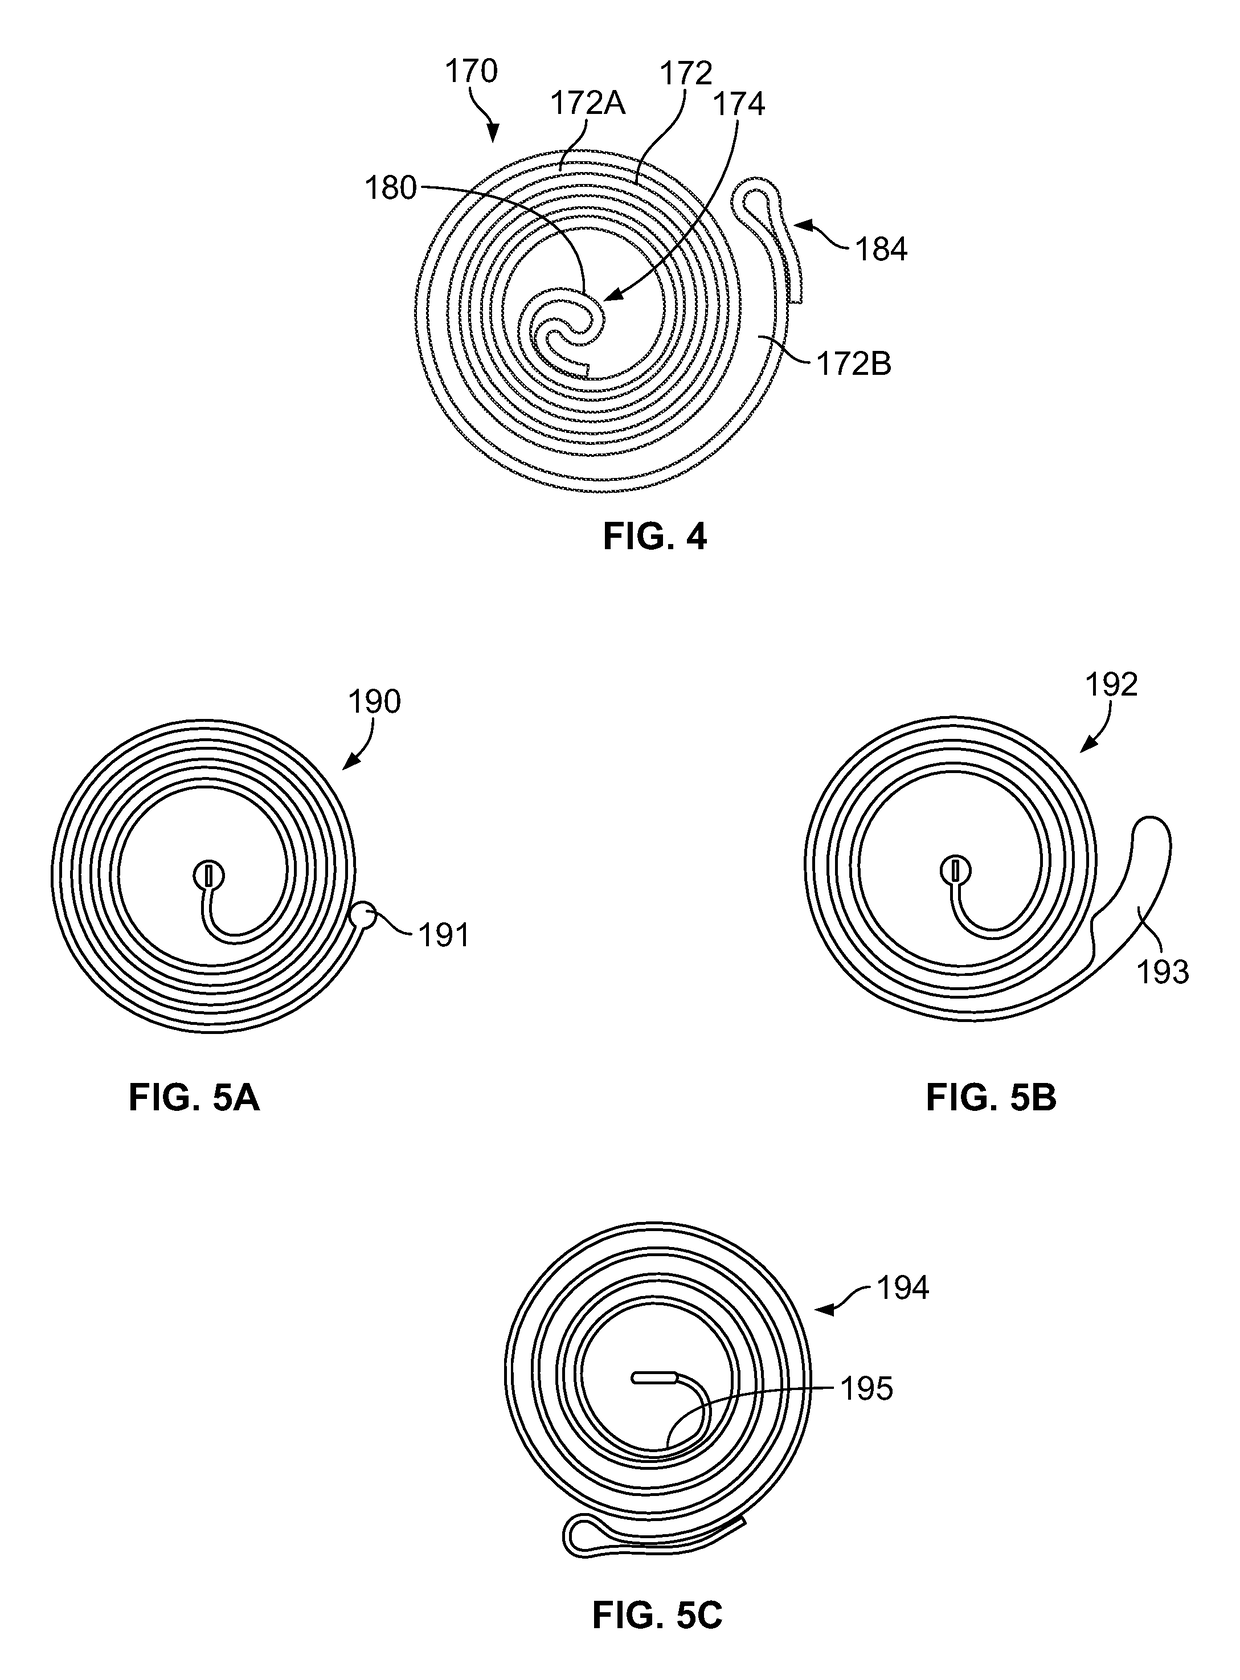 Heart valve repair devices for placement in ventricle and delivery systems for implanting heart valve repair devices